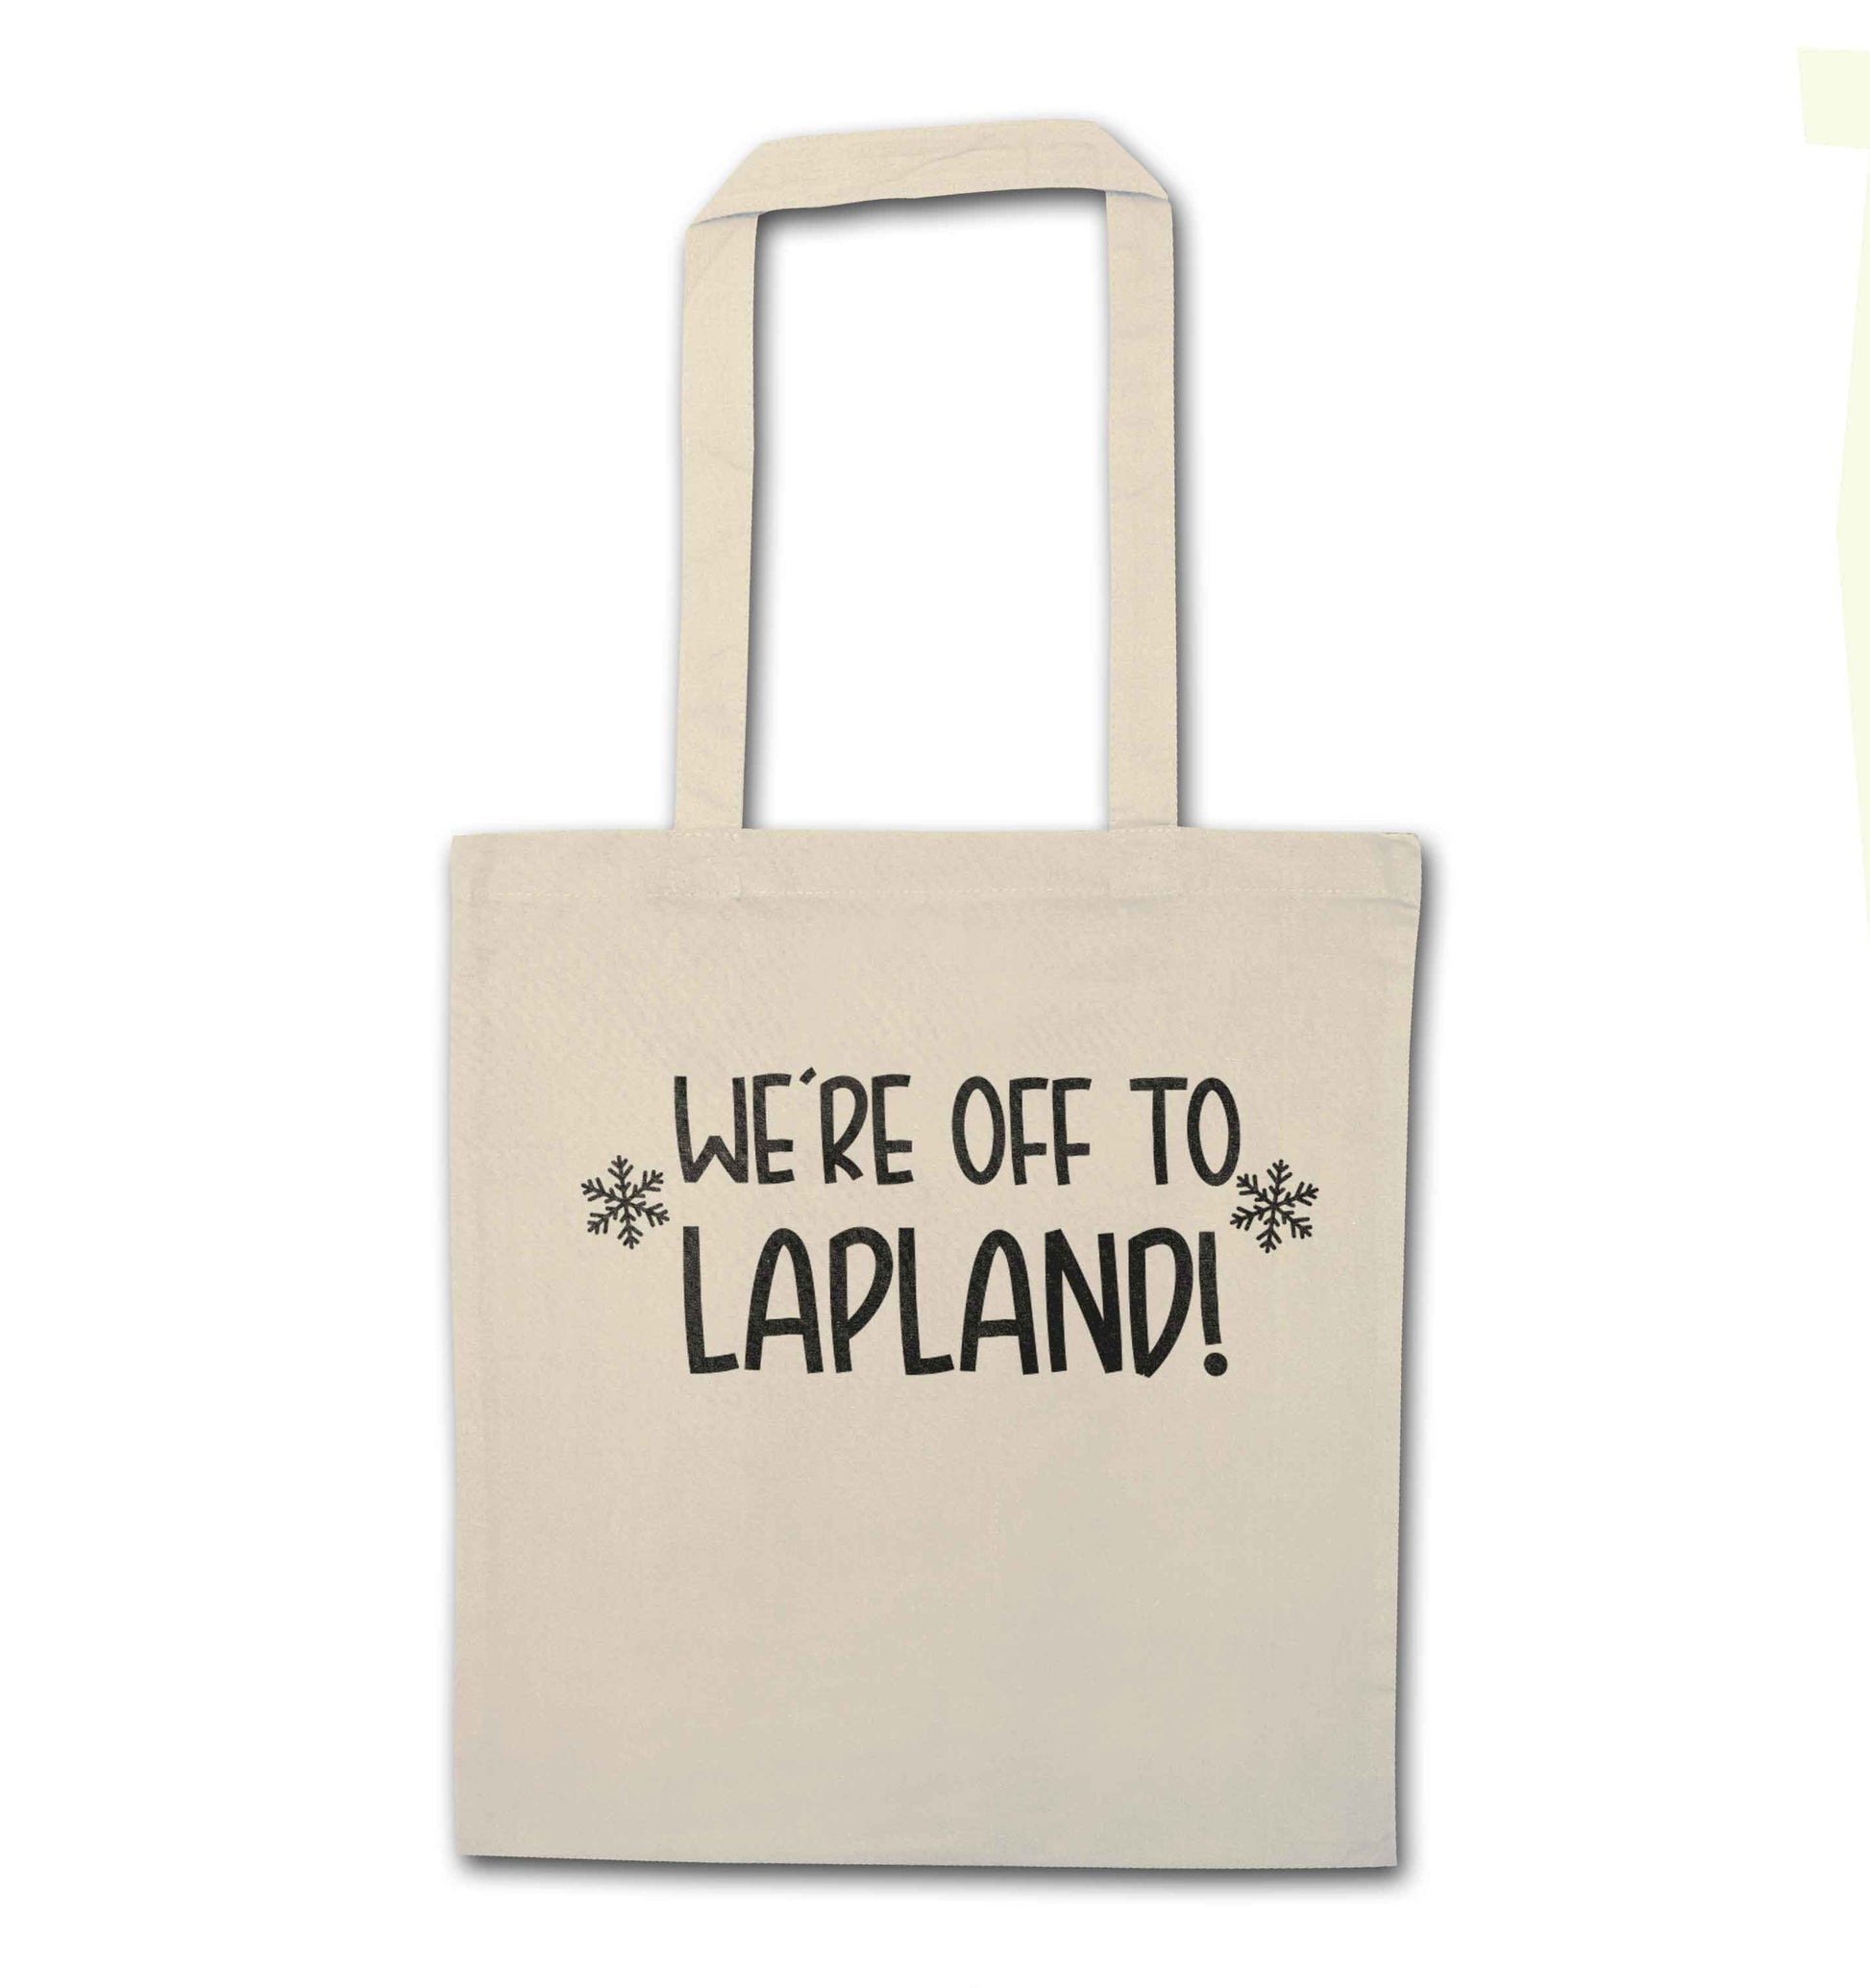 We're off to Lapland natural tote bag